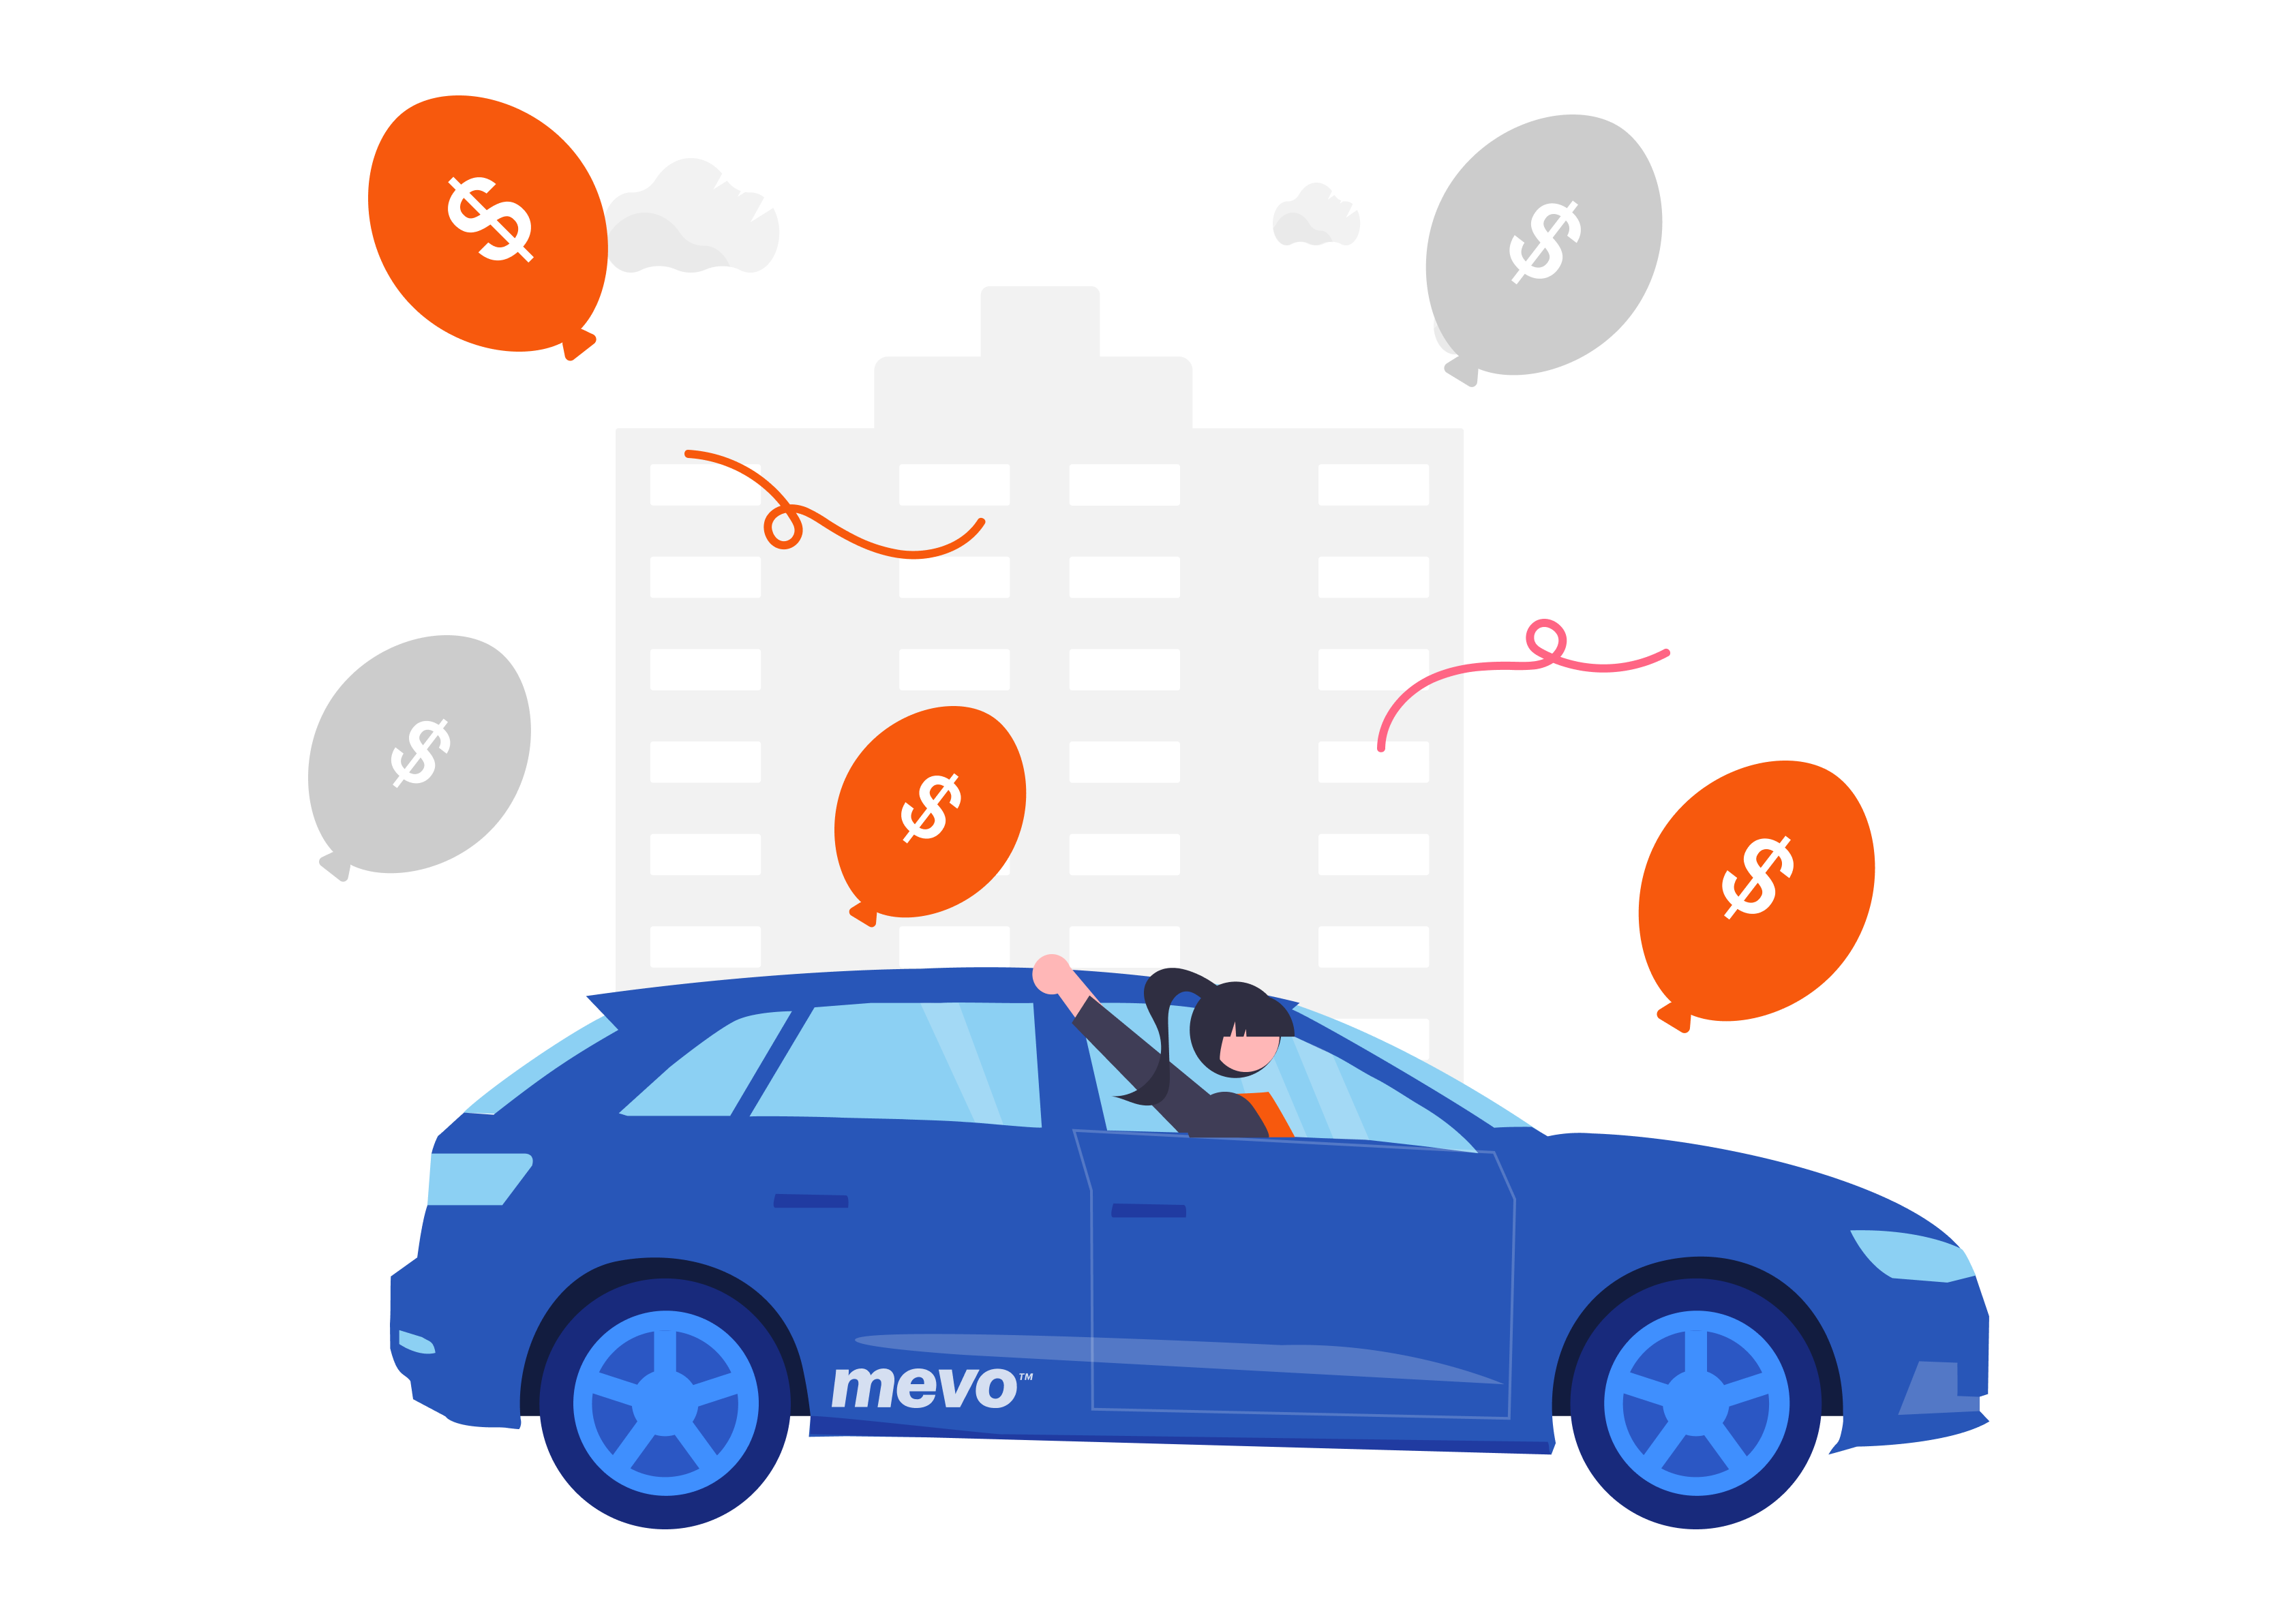 Graphic showing a staff member driving a Mevo vehicle, with illustration of the savings